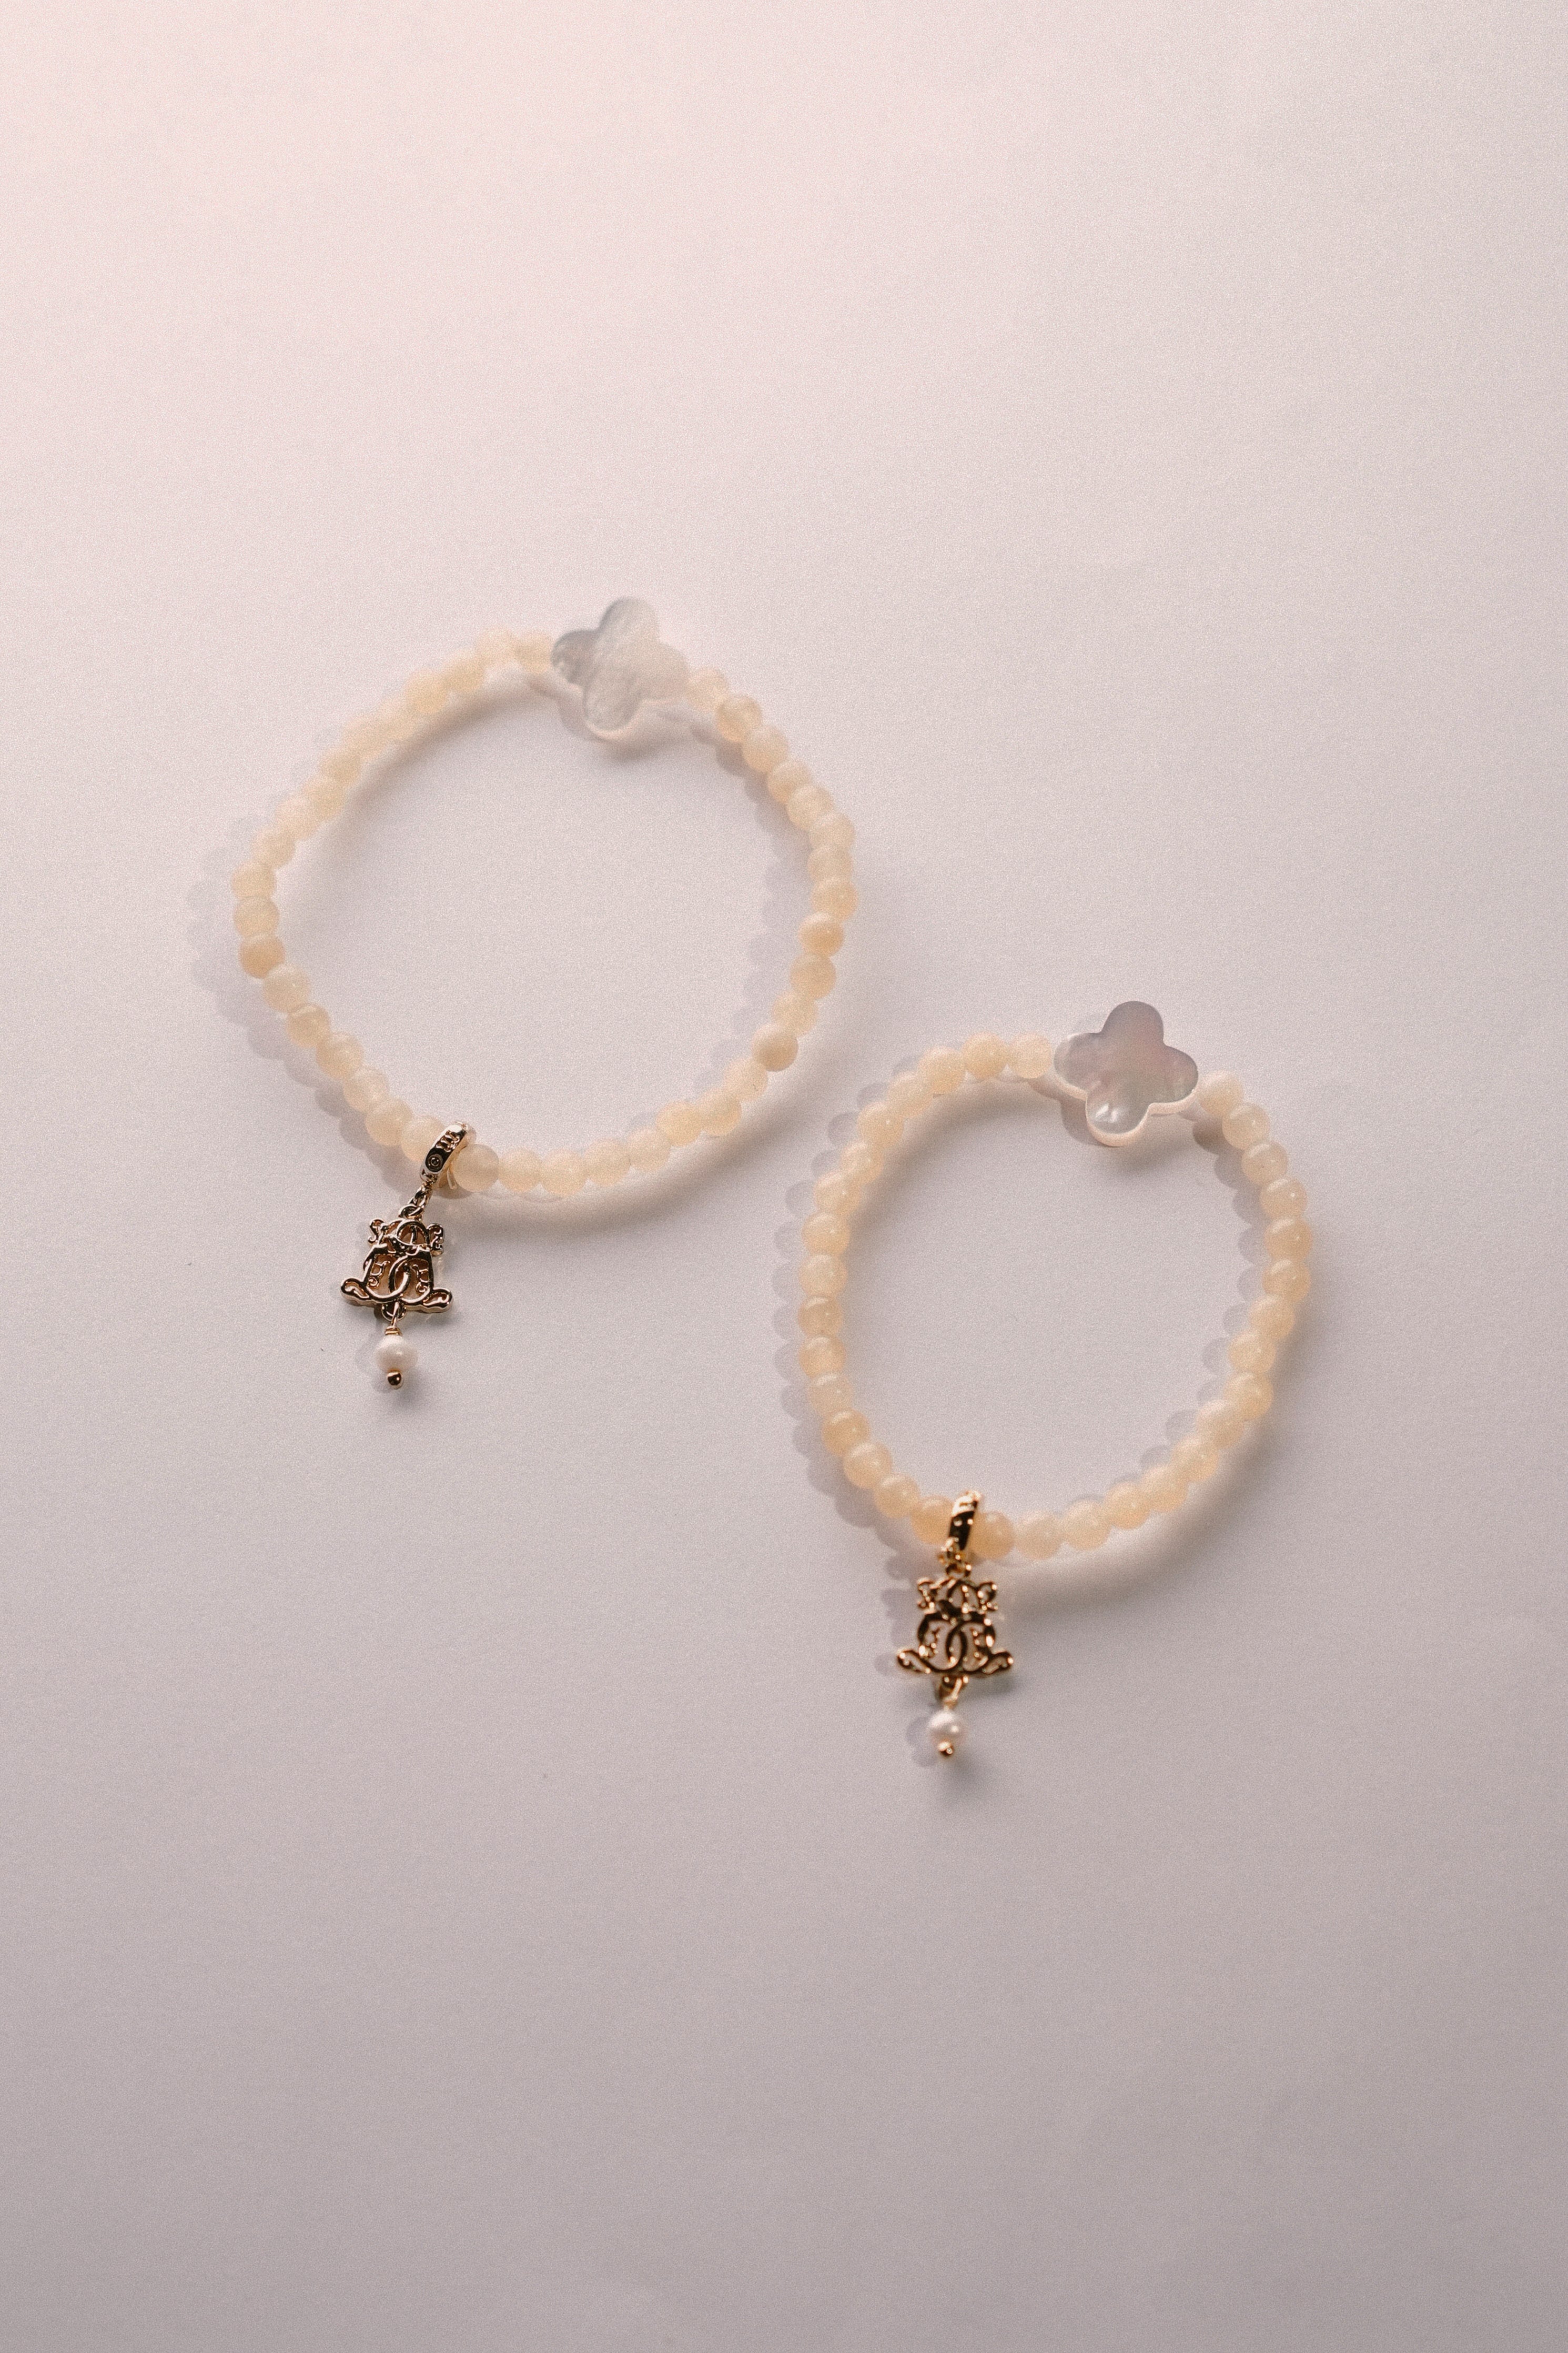 two bracelets placed on white background for product shot